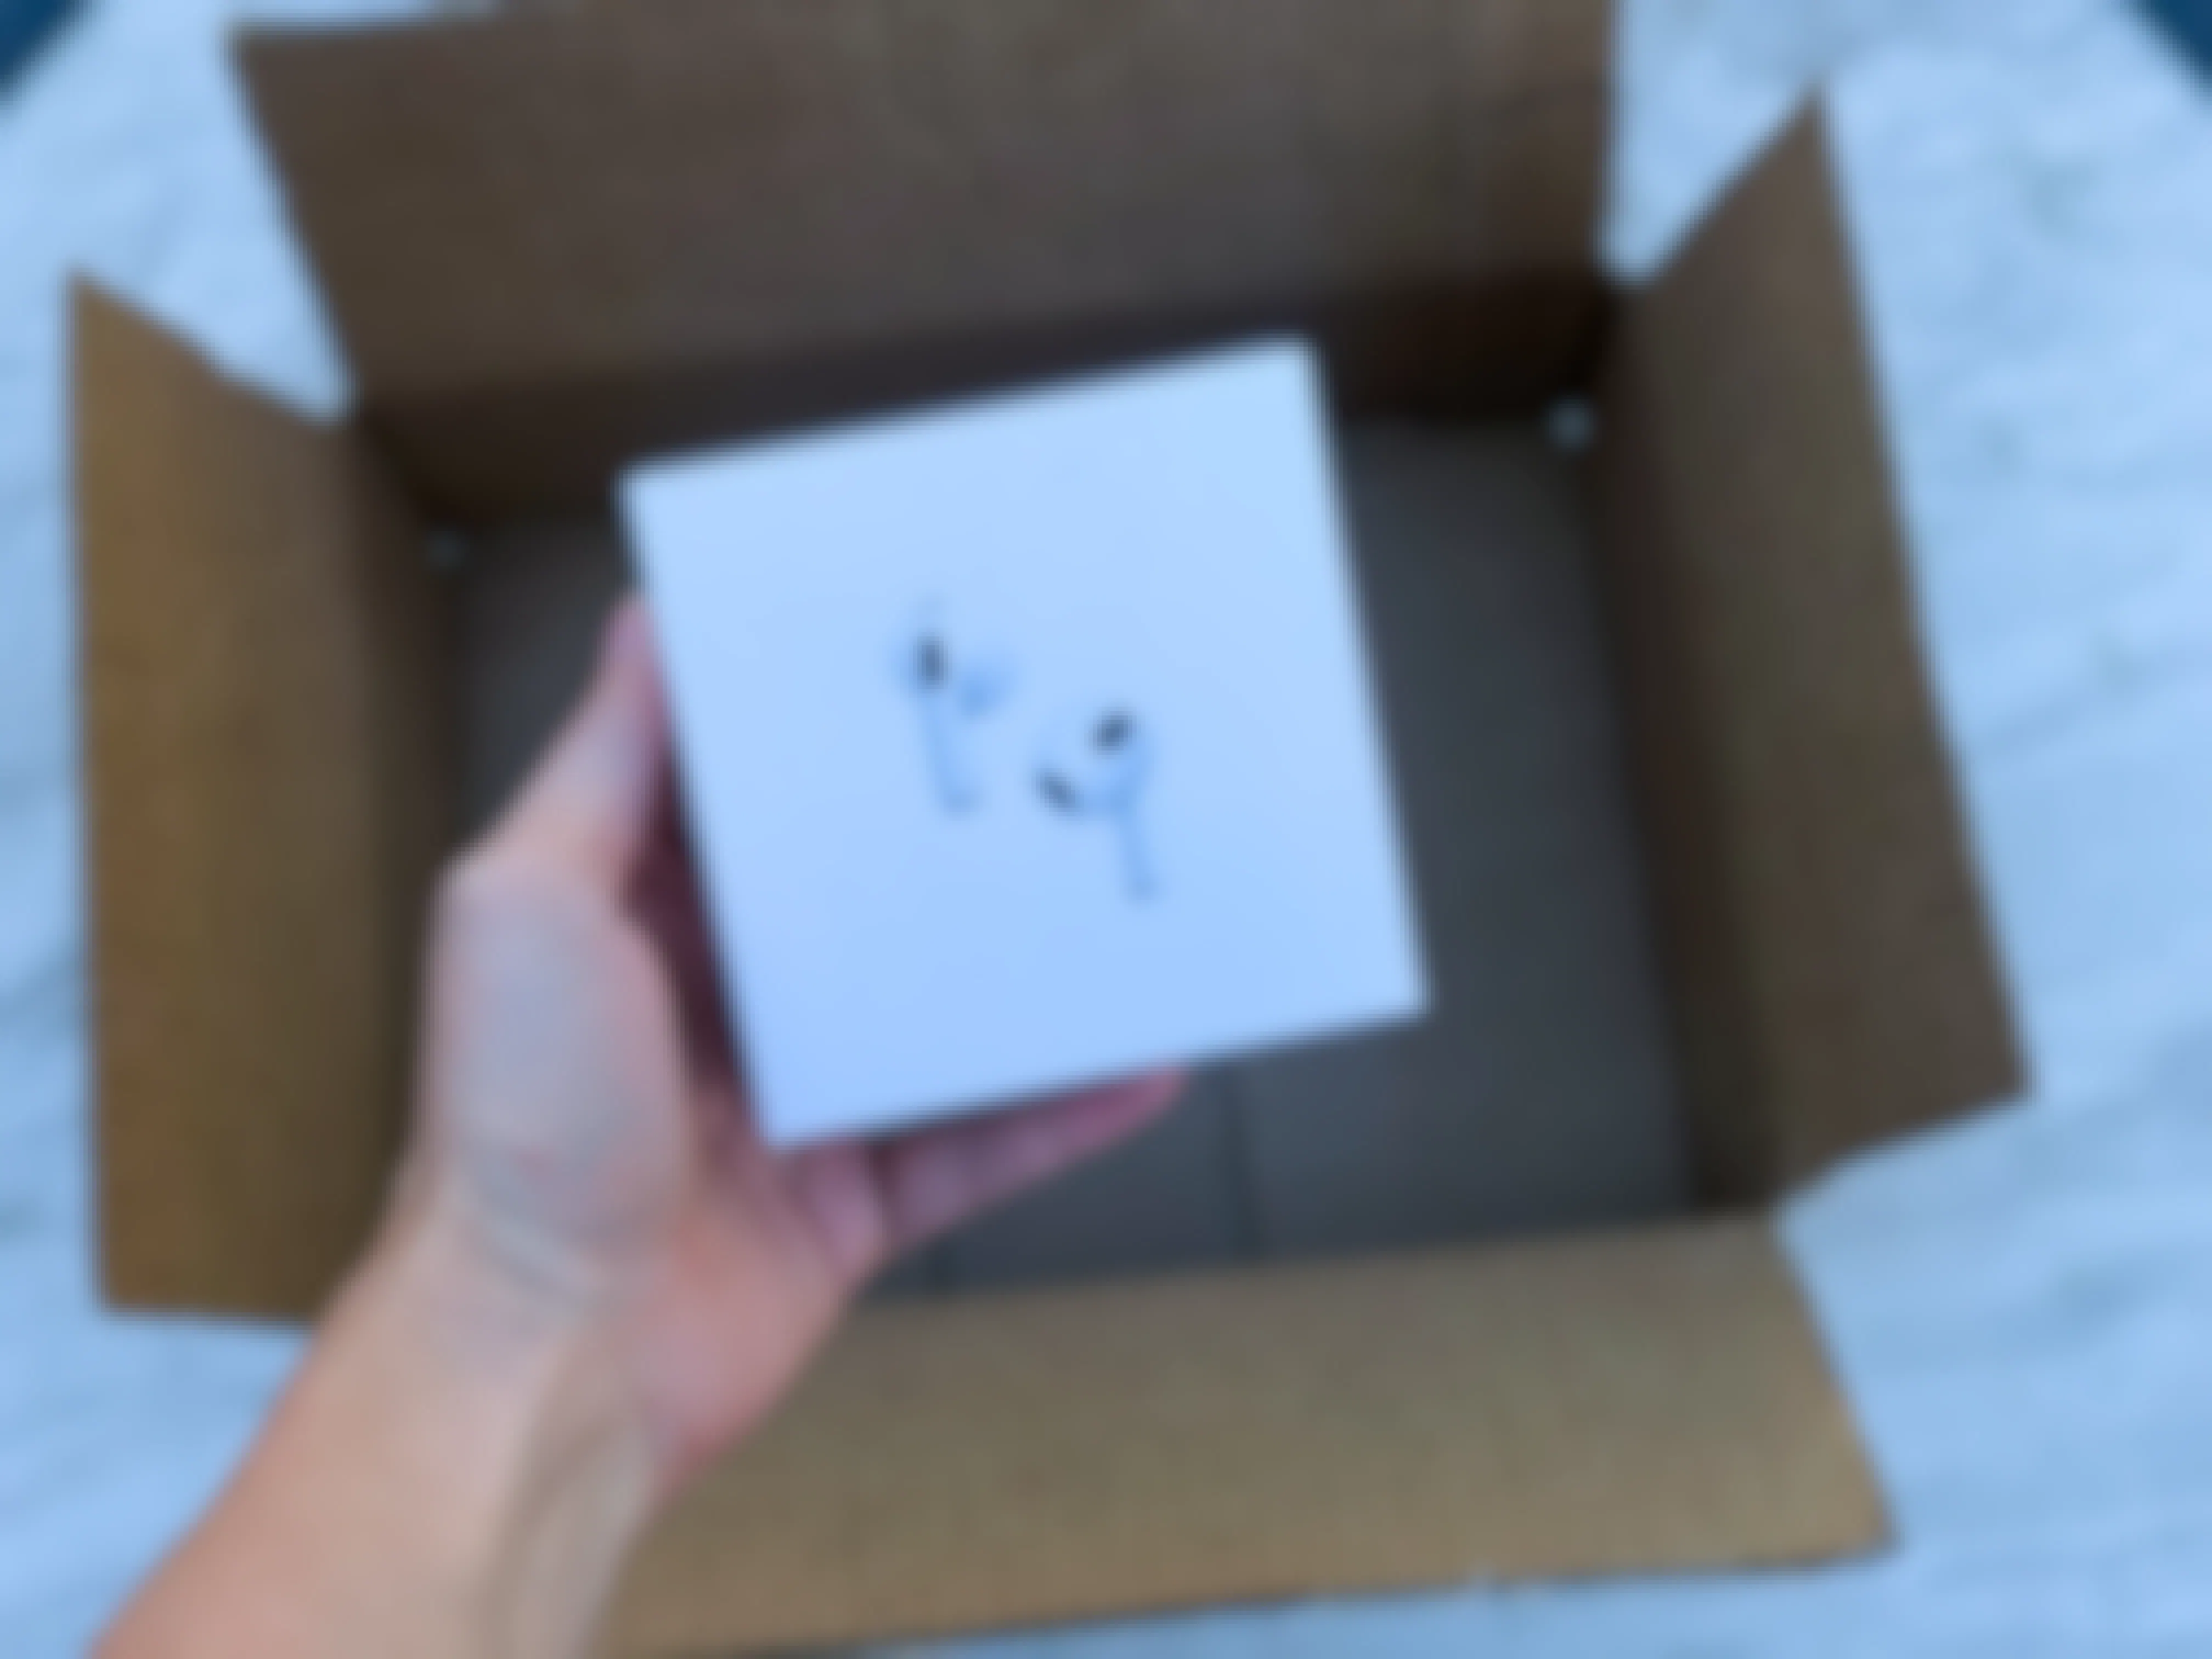 apple airpods with amazon box